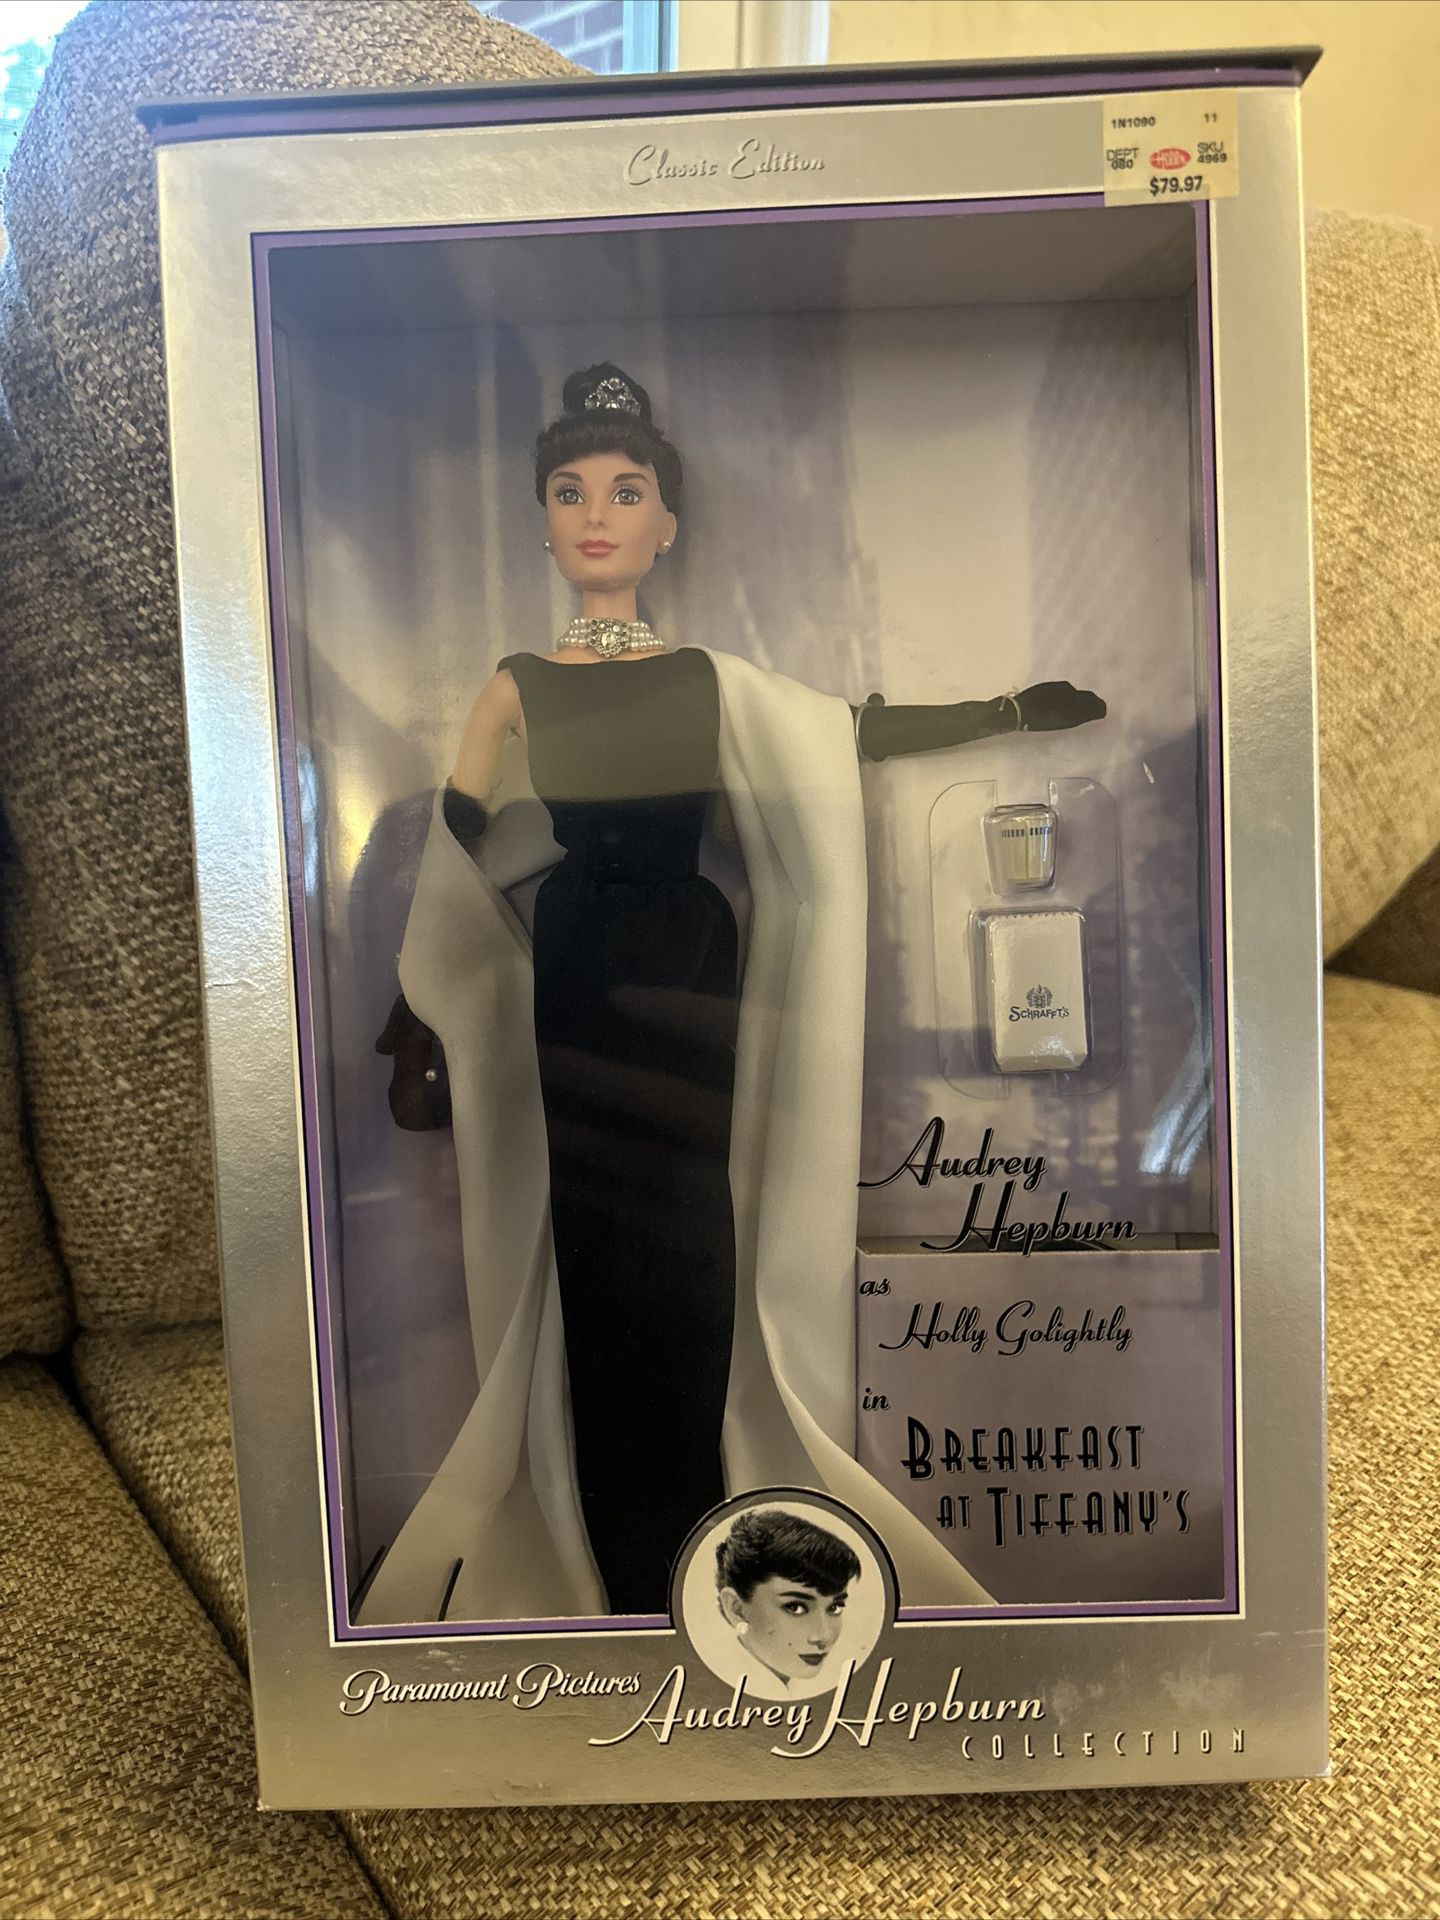 Mattel Holly Golightly Audrey Hepburn Breakfast at Tiffany's Barbie 1(contact info removed)5